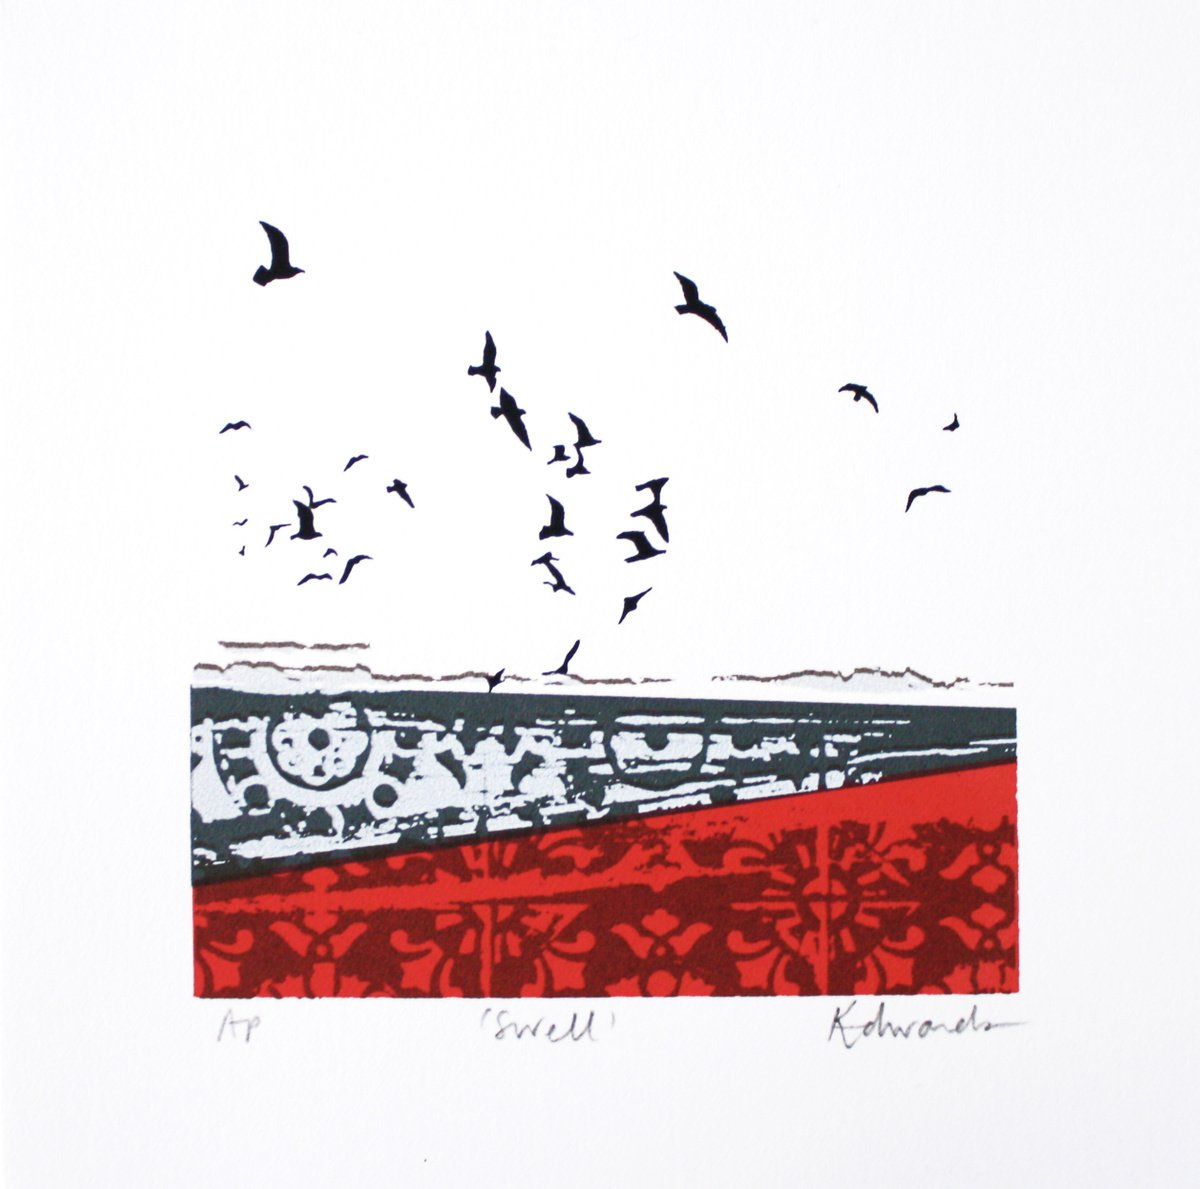 Swell (screen print) by Kath Edwards